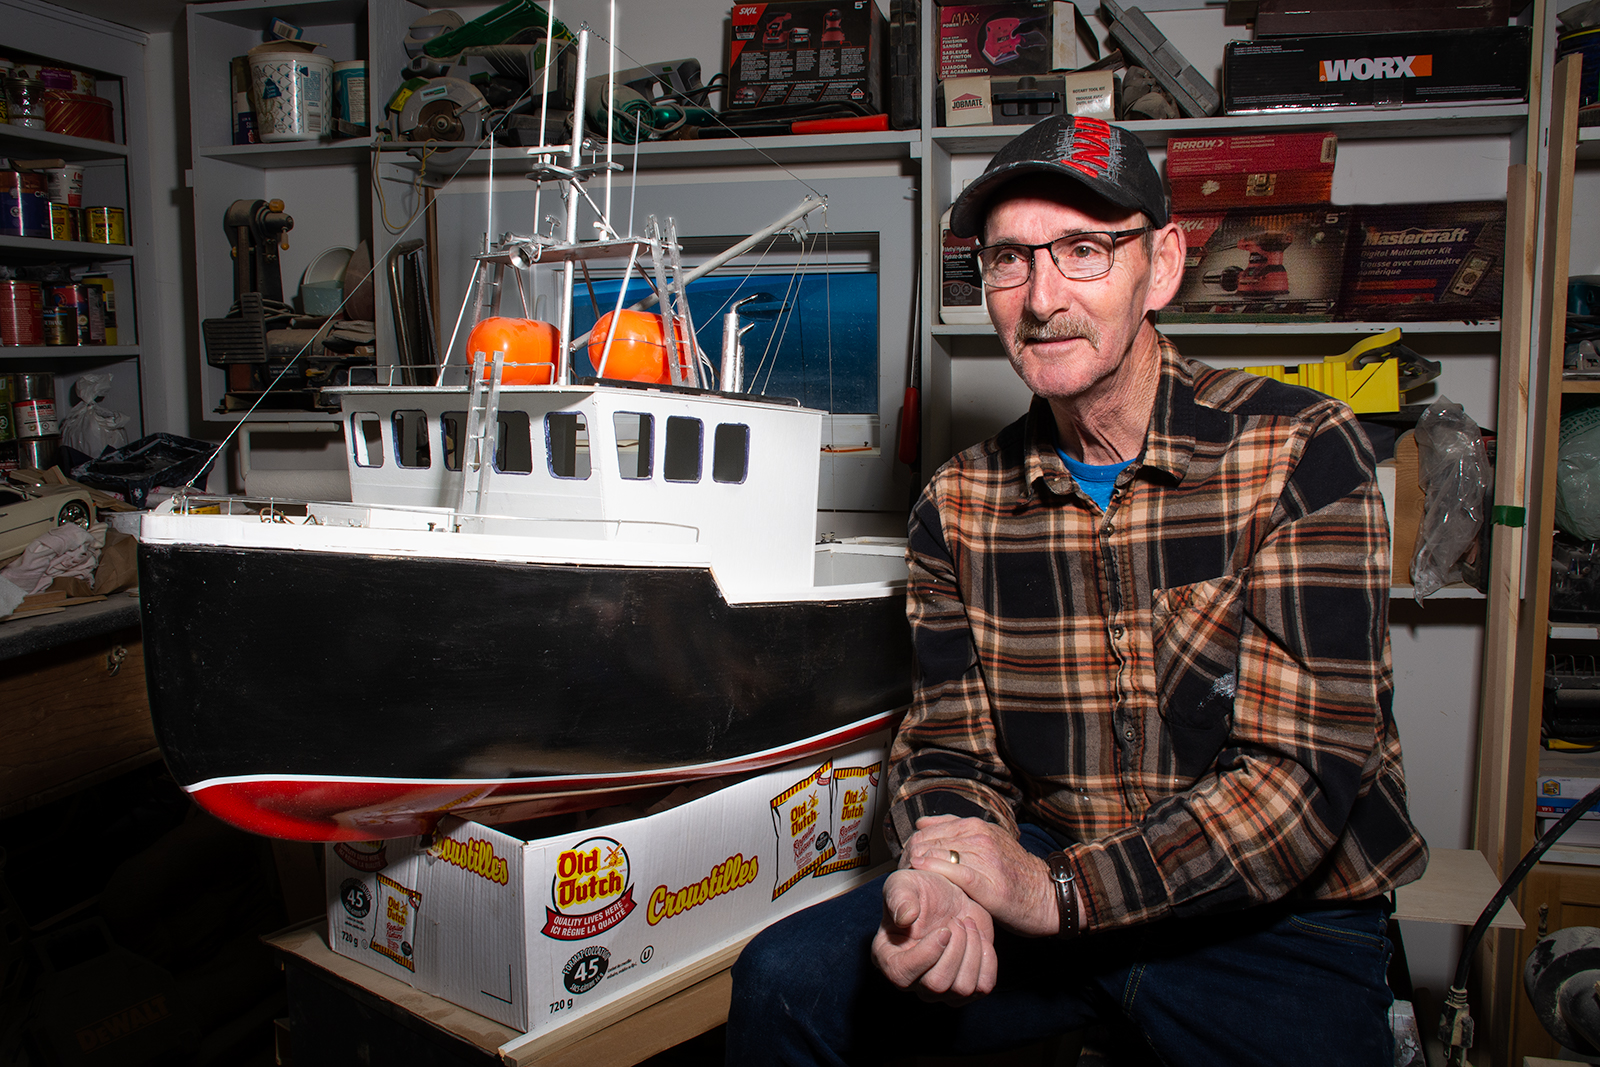 Kevin has made 100 or more model boats in the last 15 years. He would like to see the hobby catch on again.